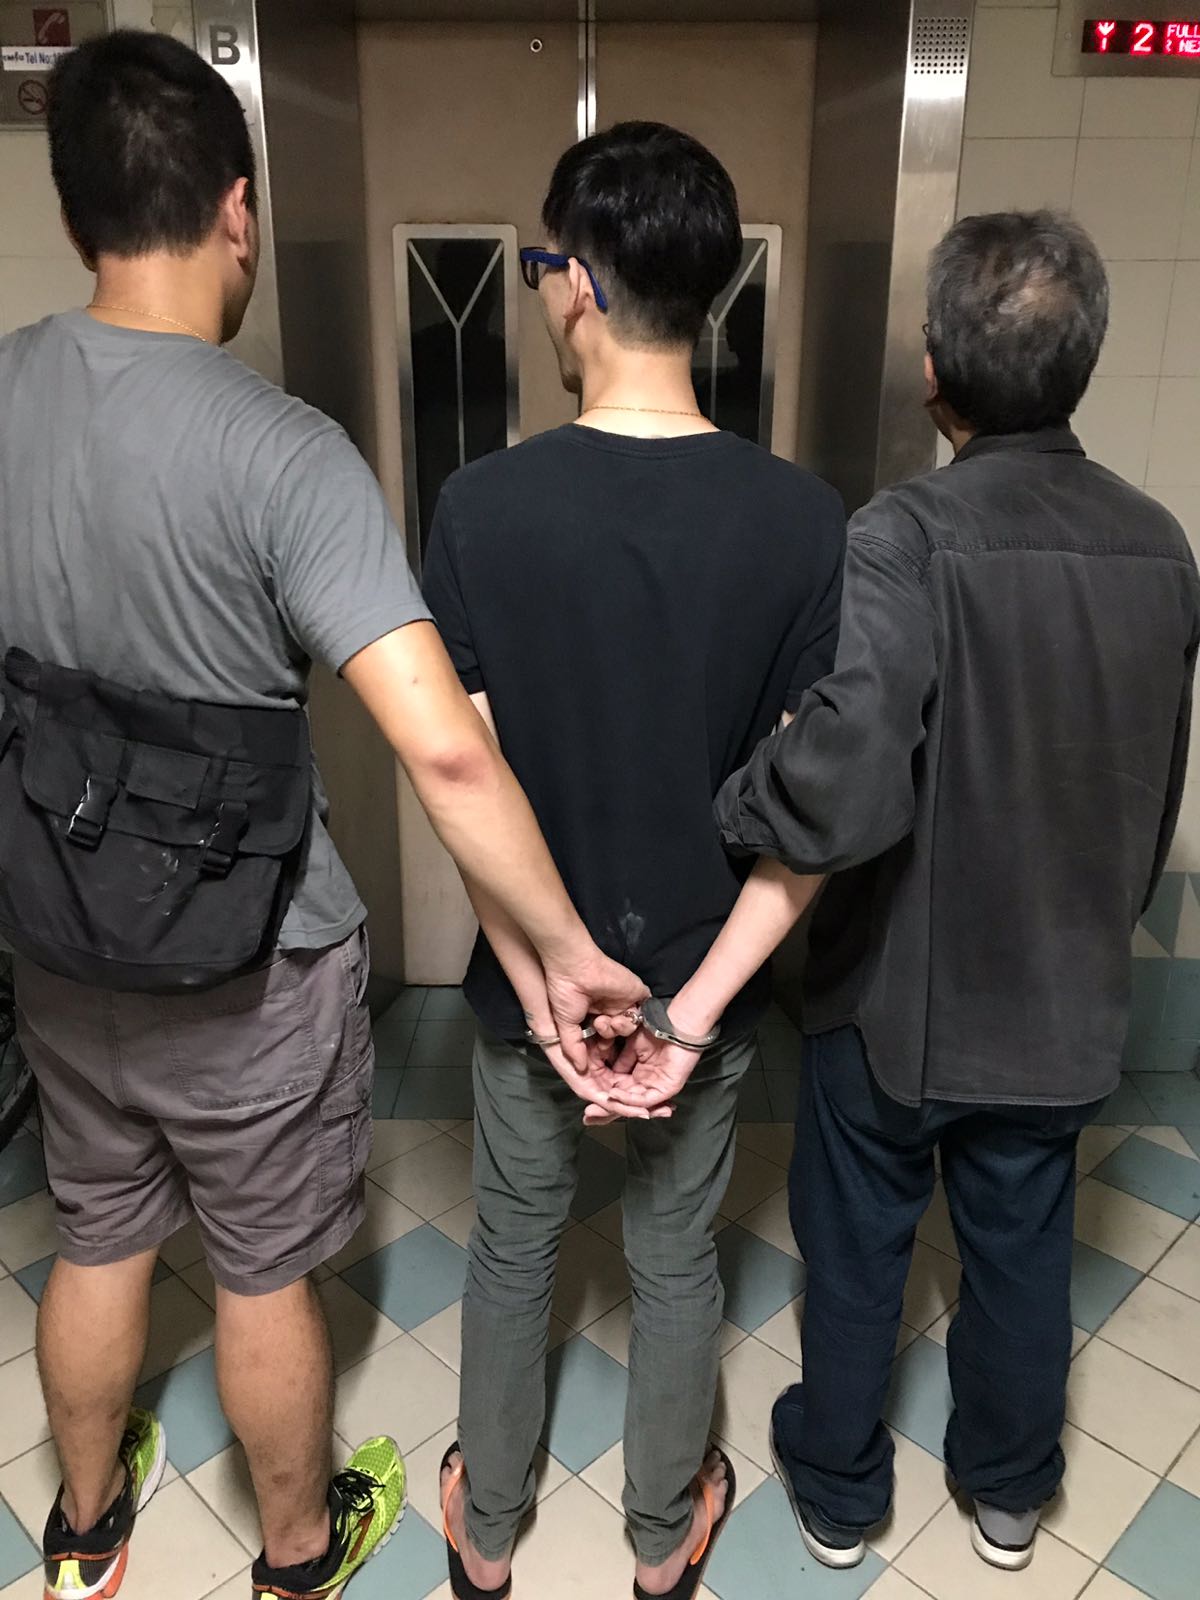 Suspect arrested in CNB operation from 26 Feb to 2 Mar 2018